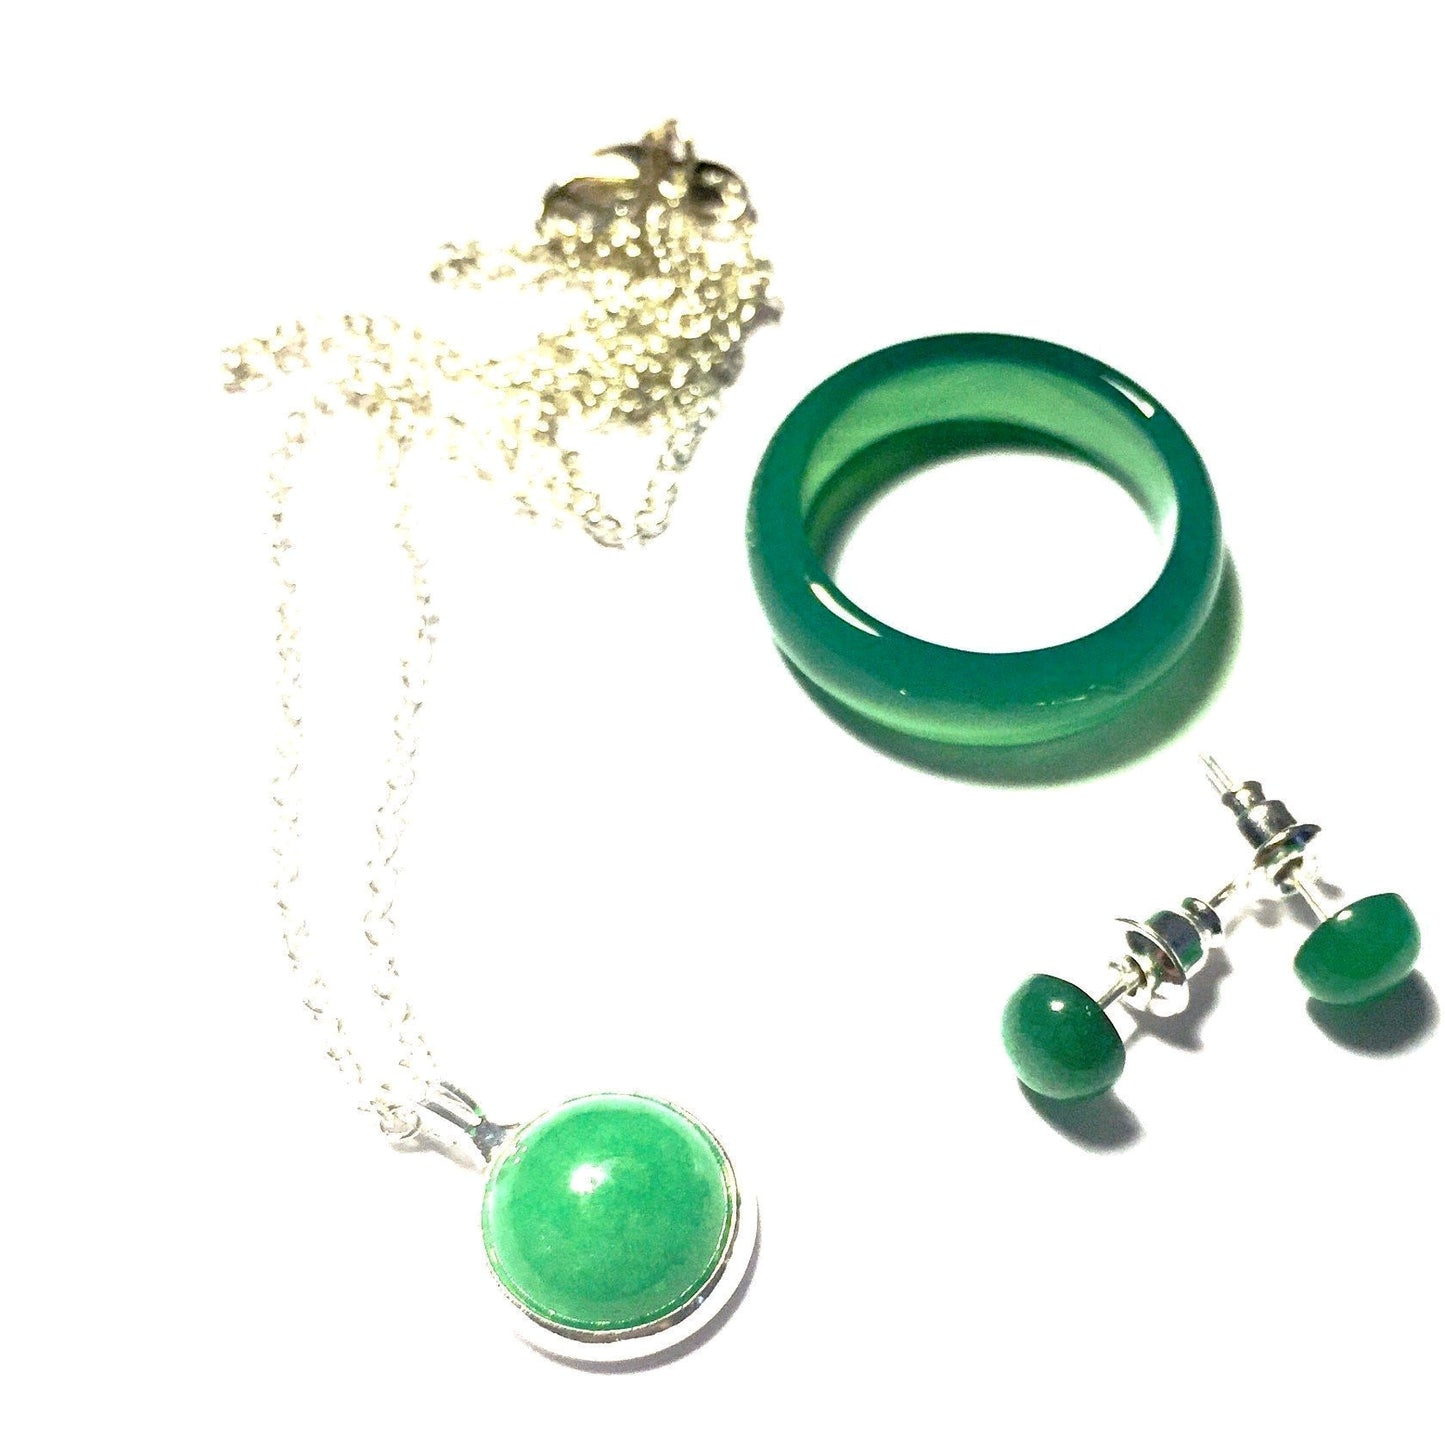 Matcha Green Tea Agate Stone Ring, Necklace, and Earring Set-Whitestone Jewelry Co.